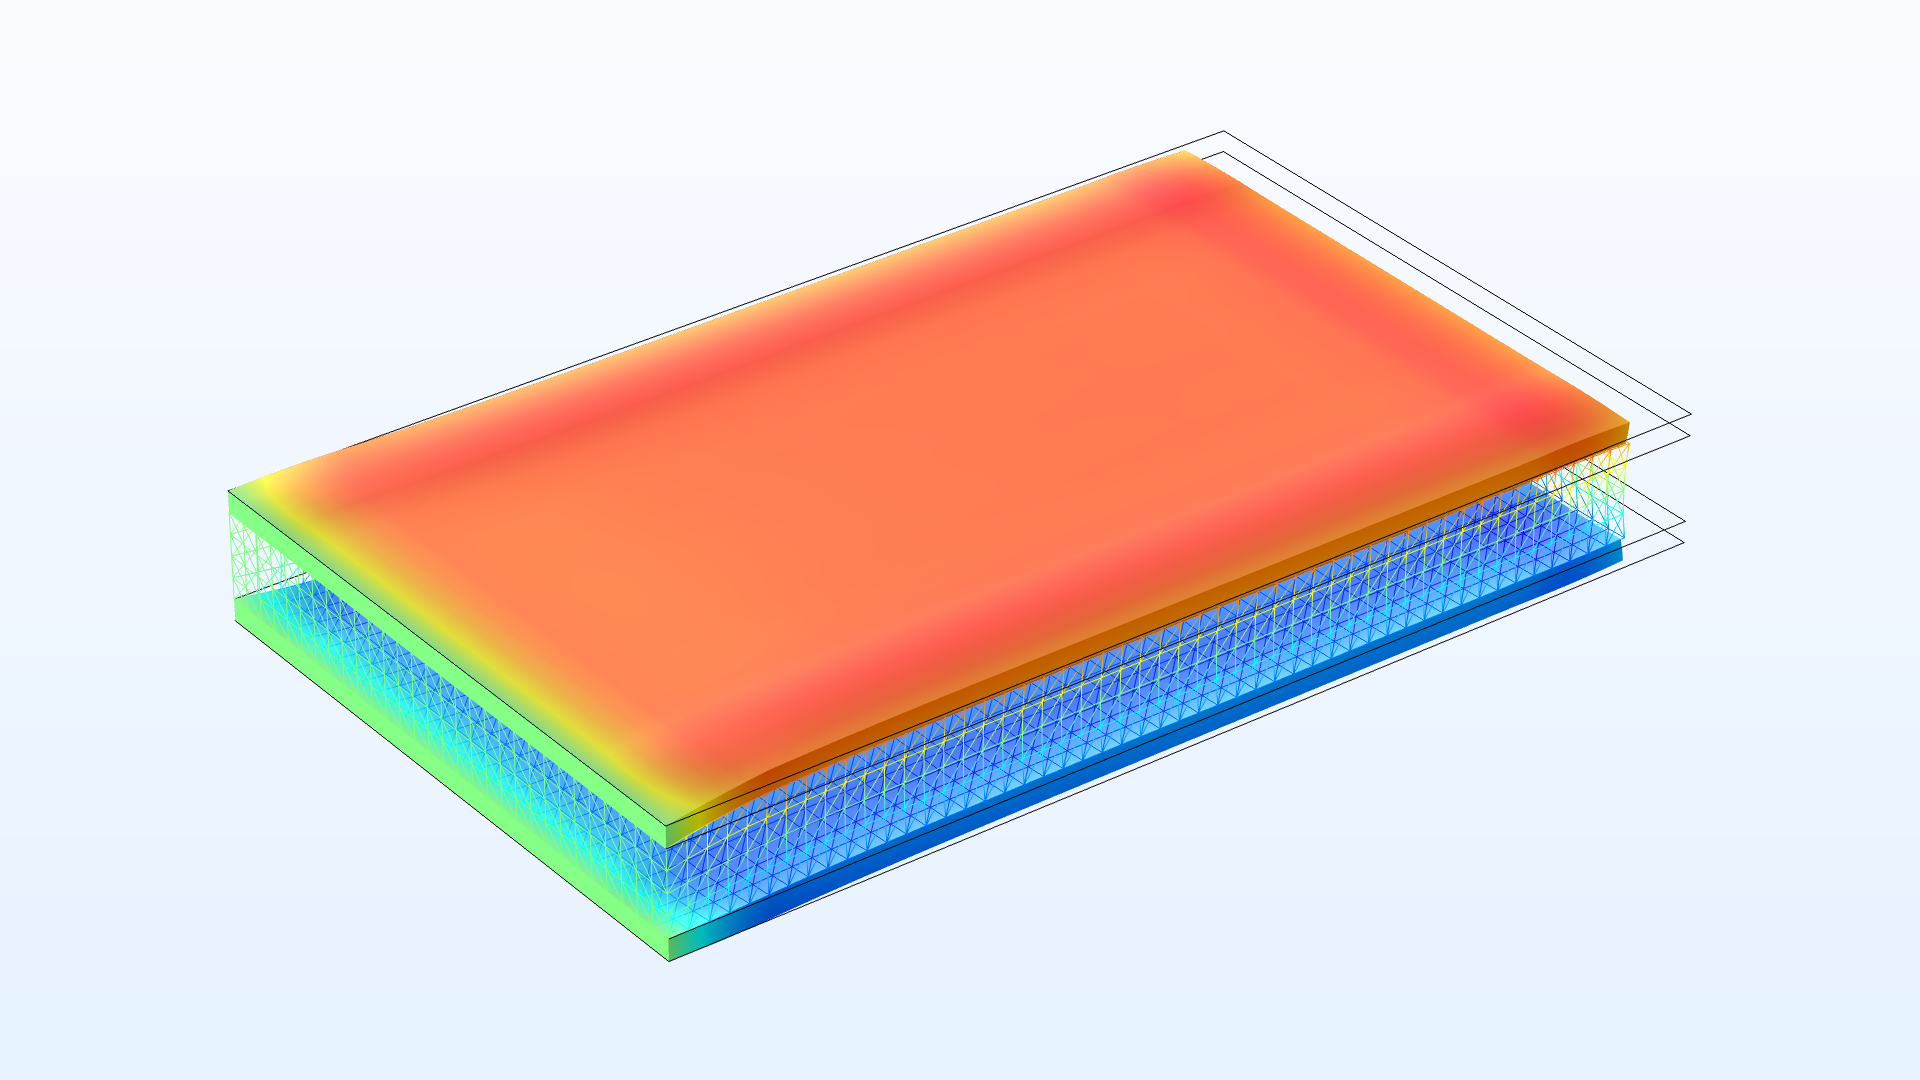 Model piezoelectric materials with the Layered Shell interface.